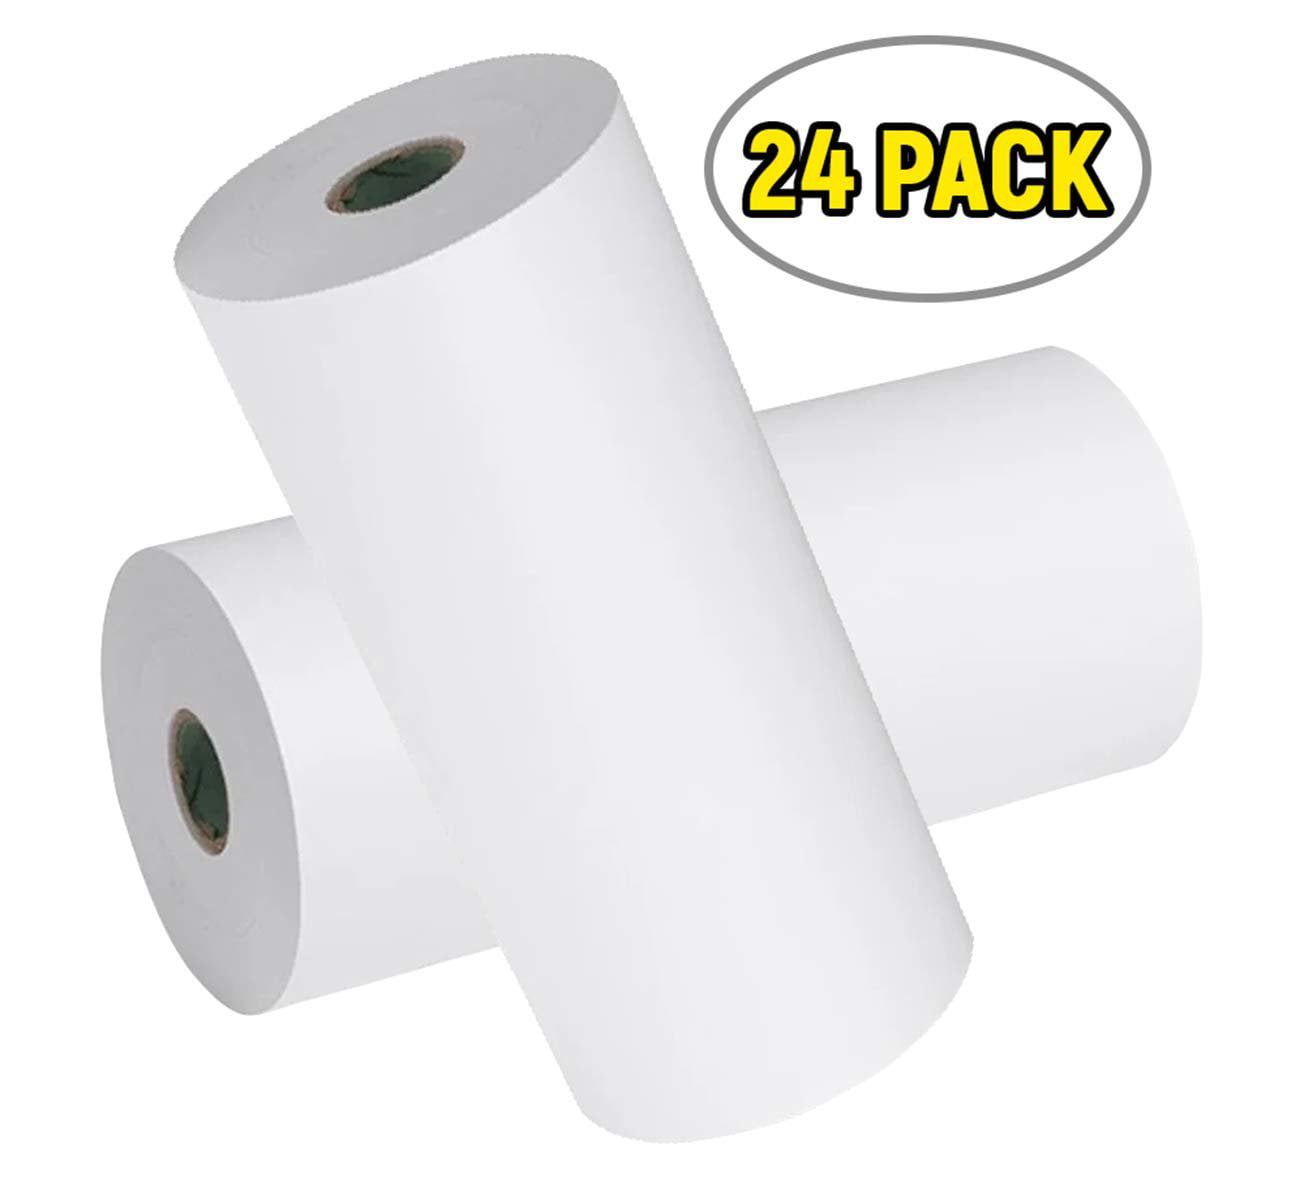 UP-860 UP-895MD Compatible UP-870MD UP-D890 5 Rolls of high Gloss Printing Paper UPP110HD Paper for Medical Diagnostic Equipment. Video Paper 110 mm x 20 Meter UP-850